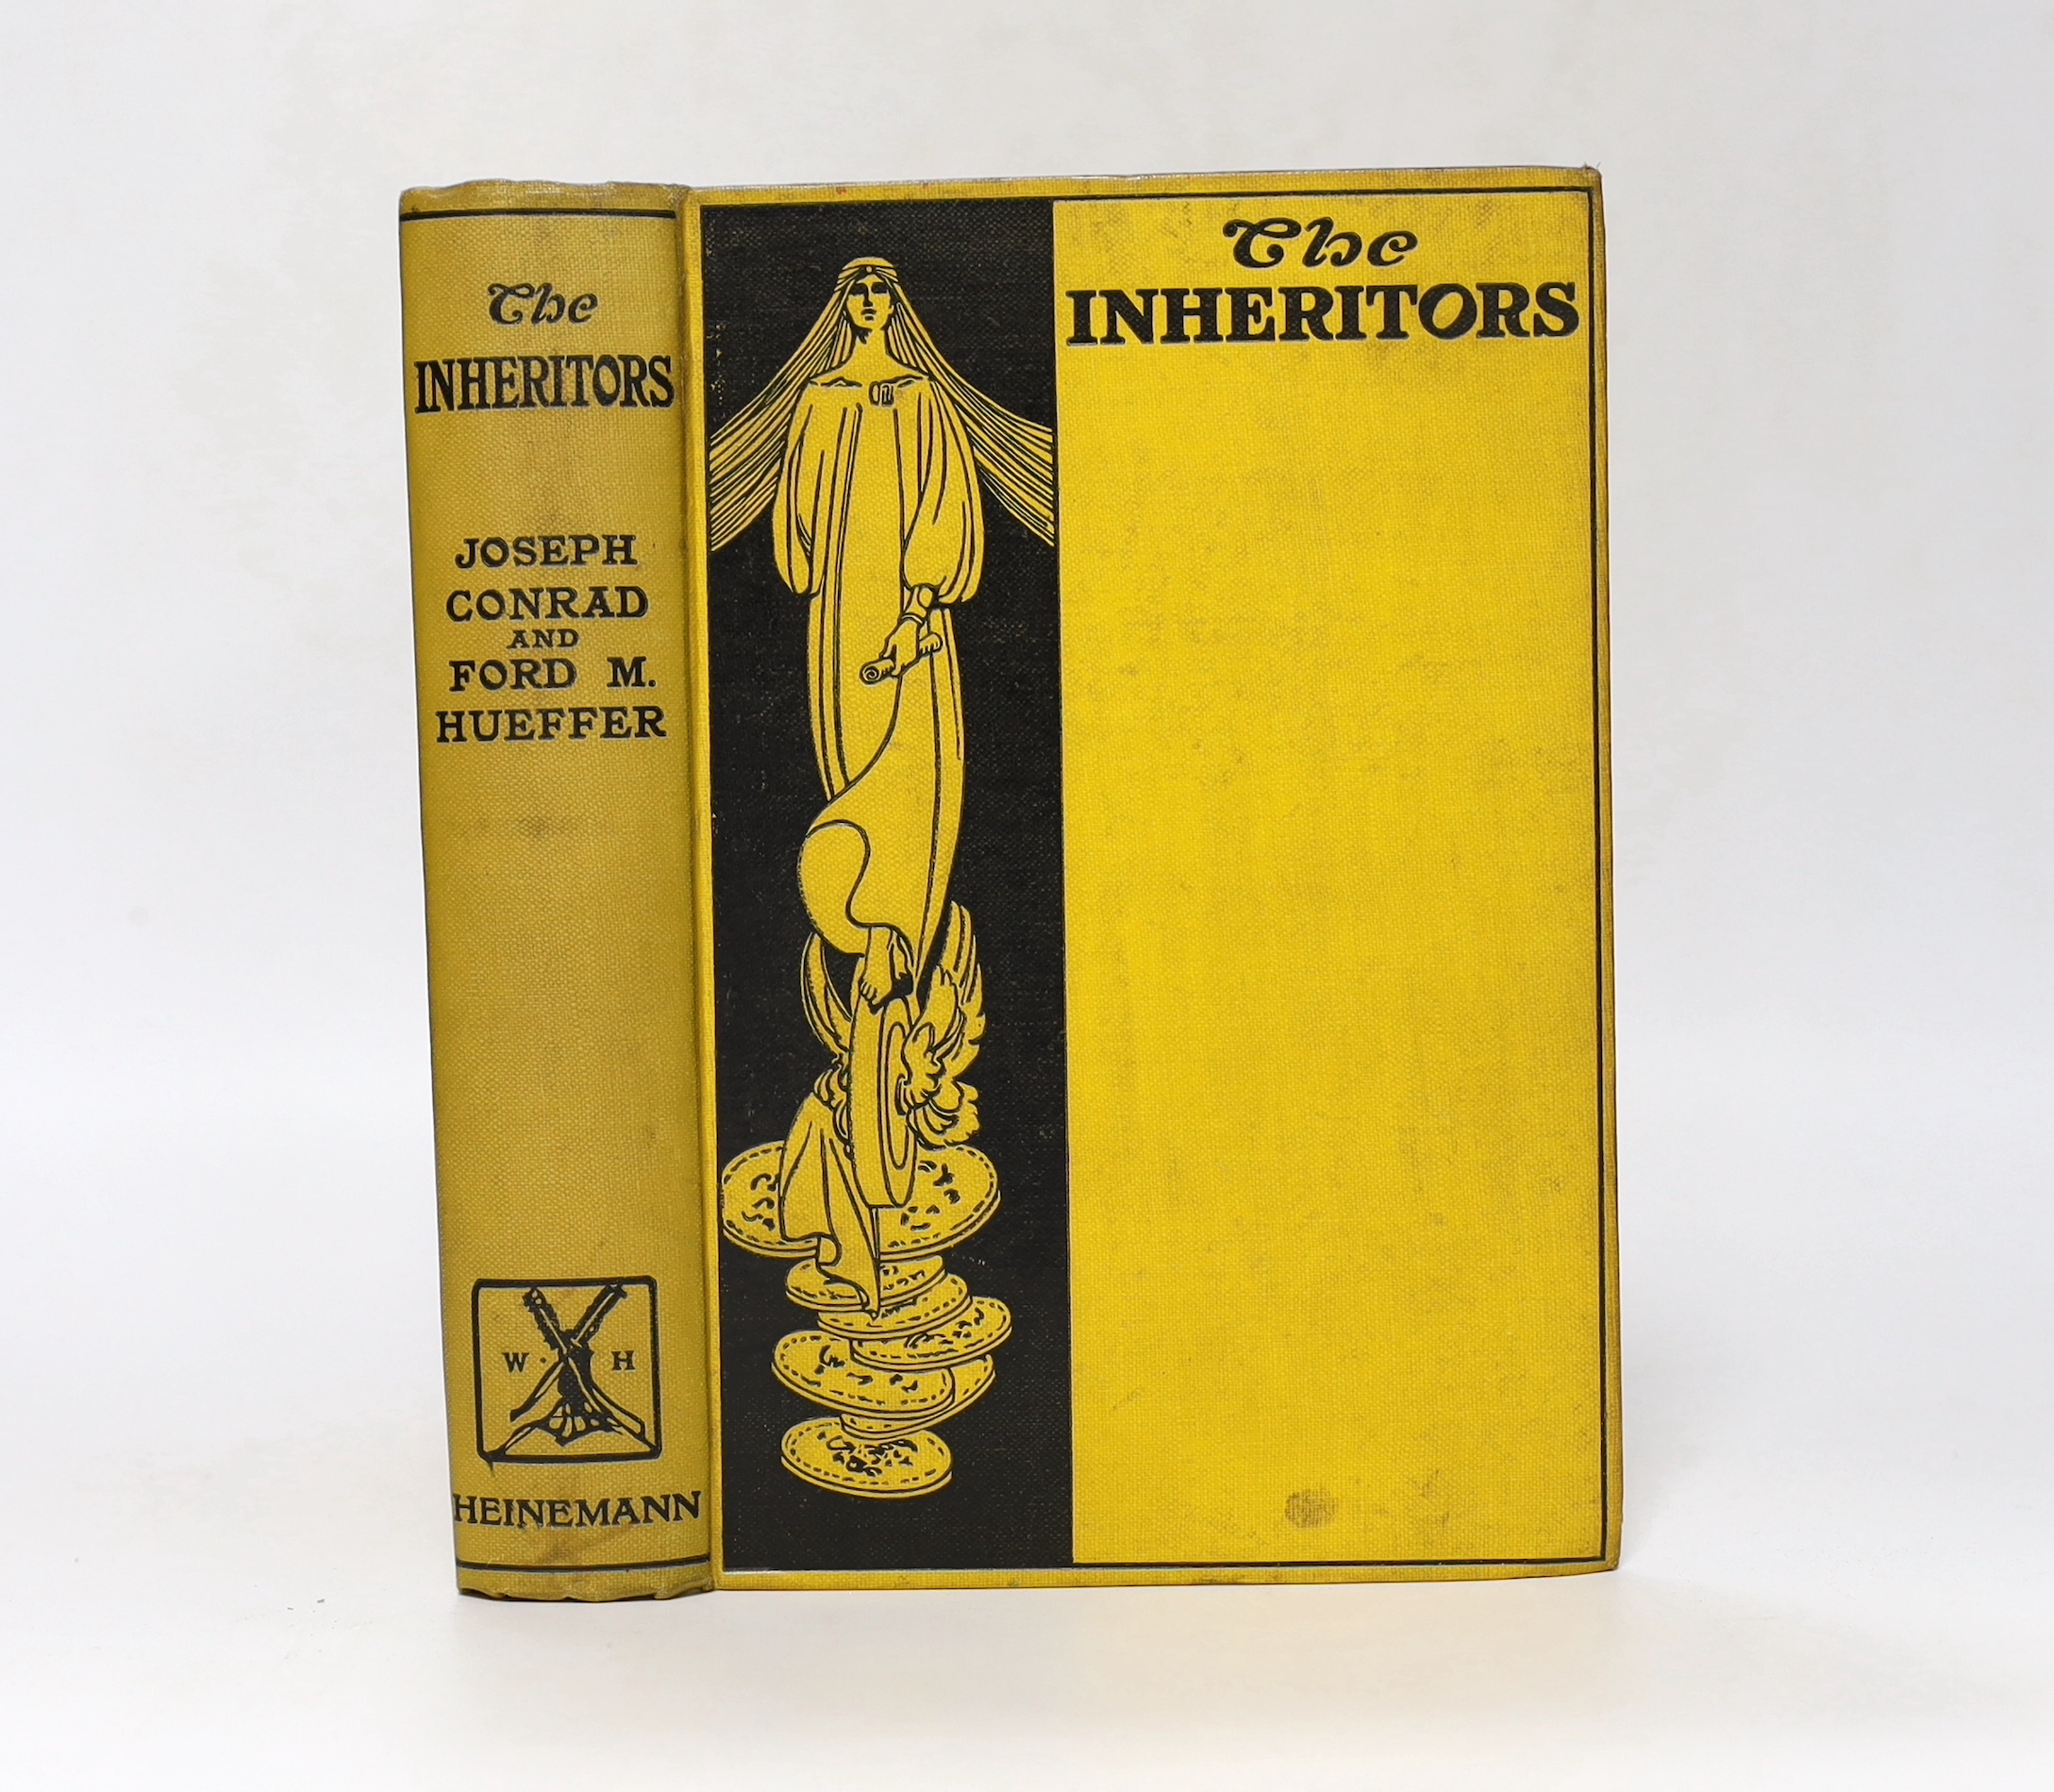 Conrad, Joseph and Hueffer, Ford Madox - The Inheritors: An Extravagant Story, 1st English edition, 8vo, yellow pictorial cloth, without dedication leaf later inserted in some copies, lacks front endpaper and half title,